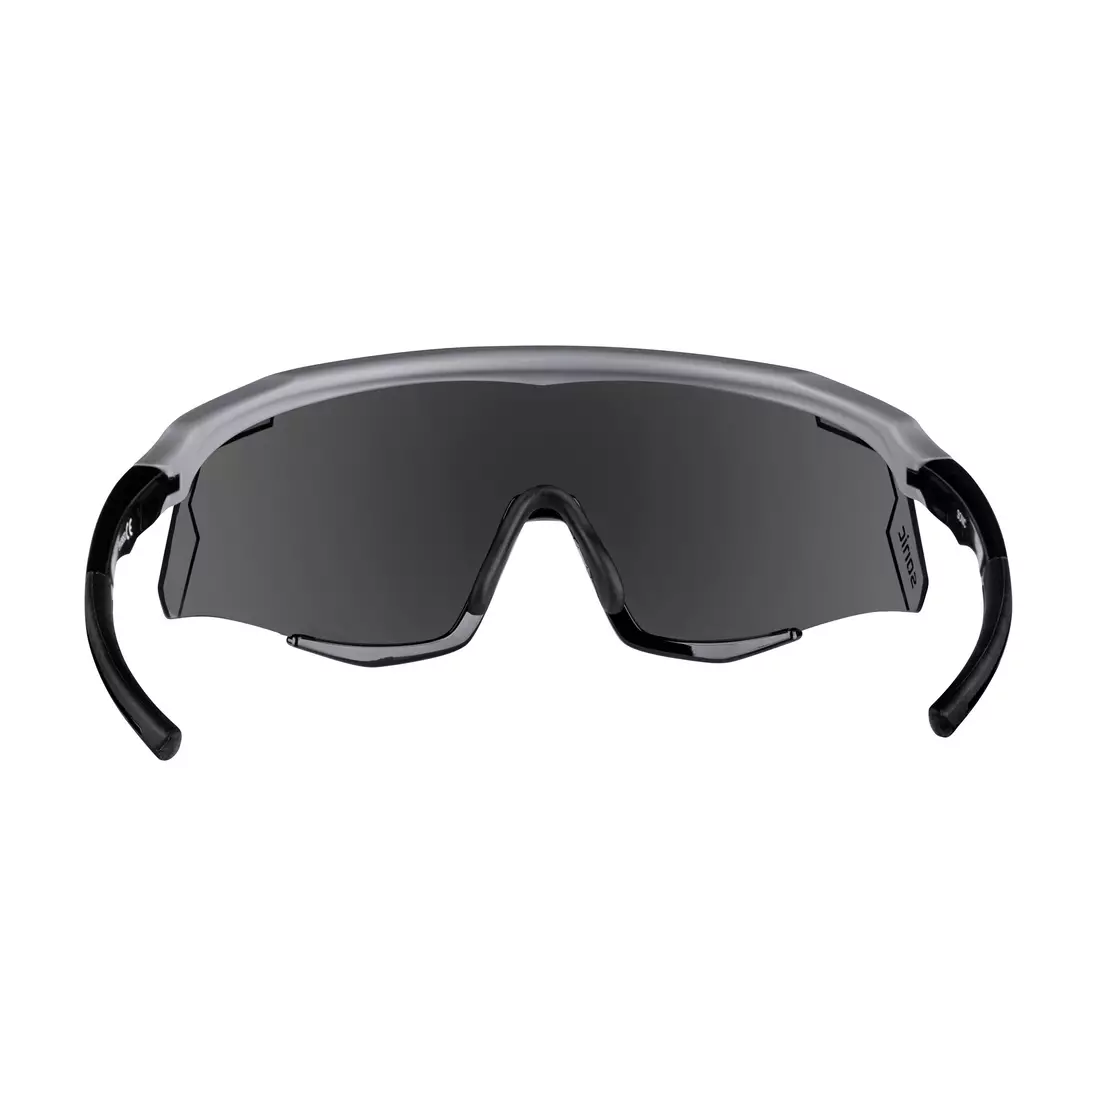 FORCE cycling / sports glasses SONIC, gray-black, 910953